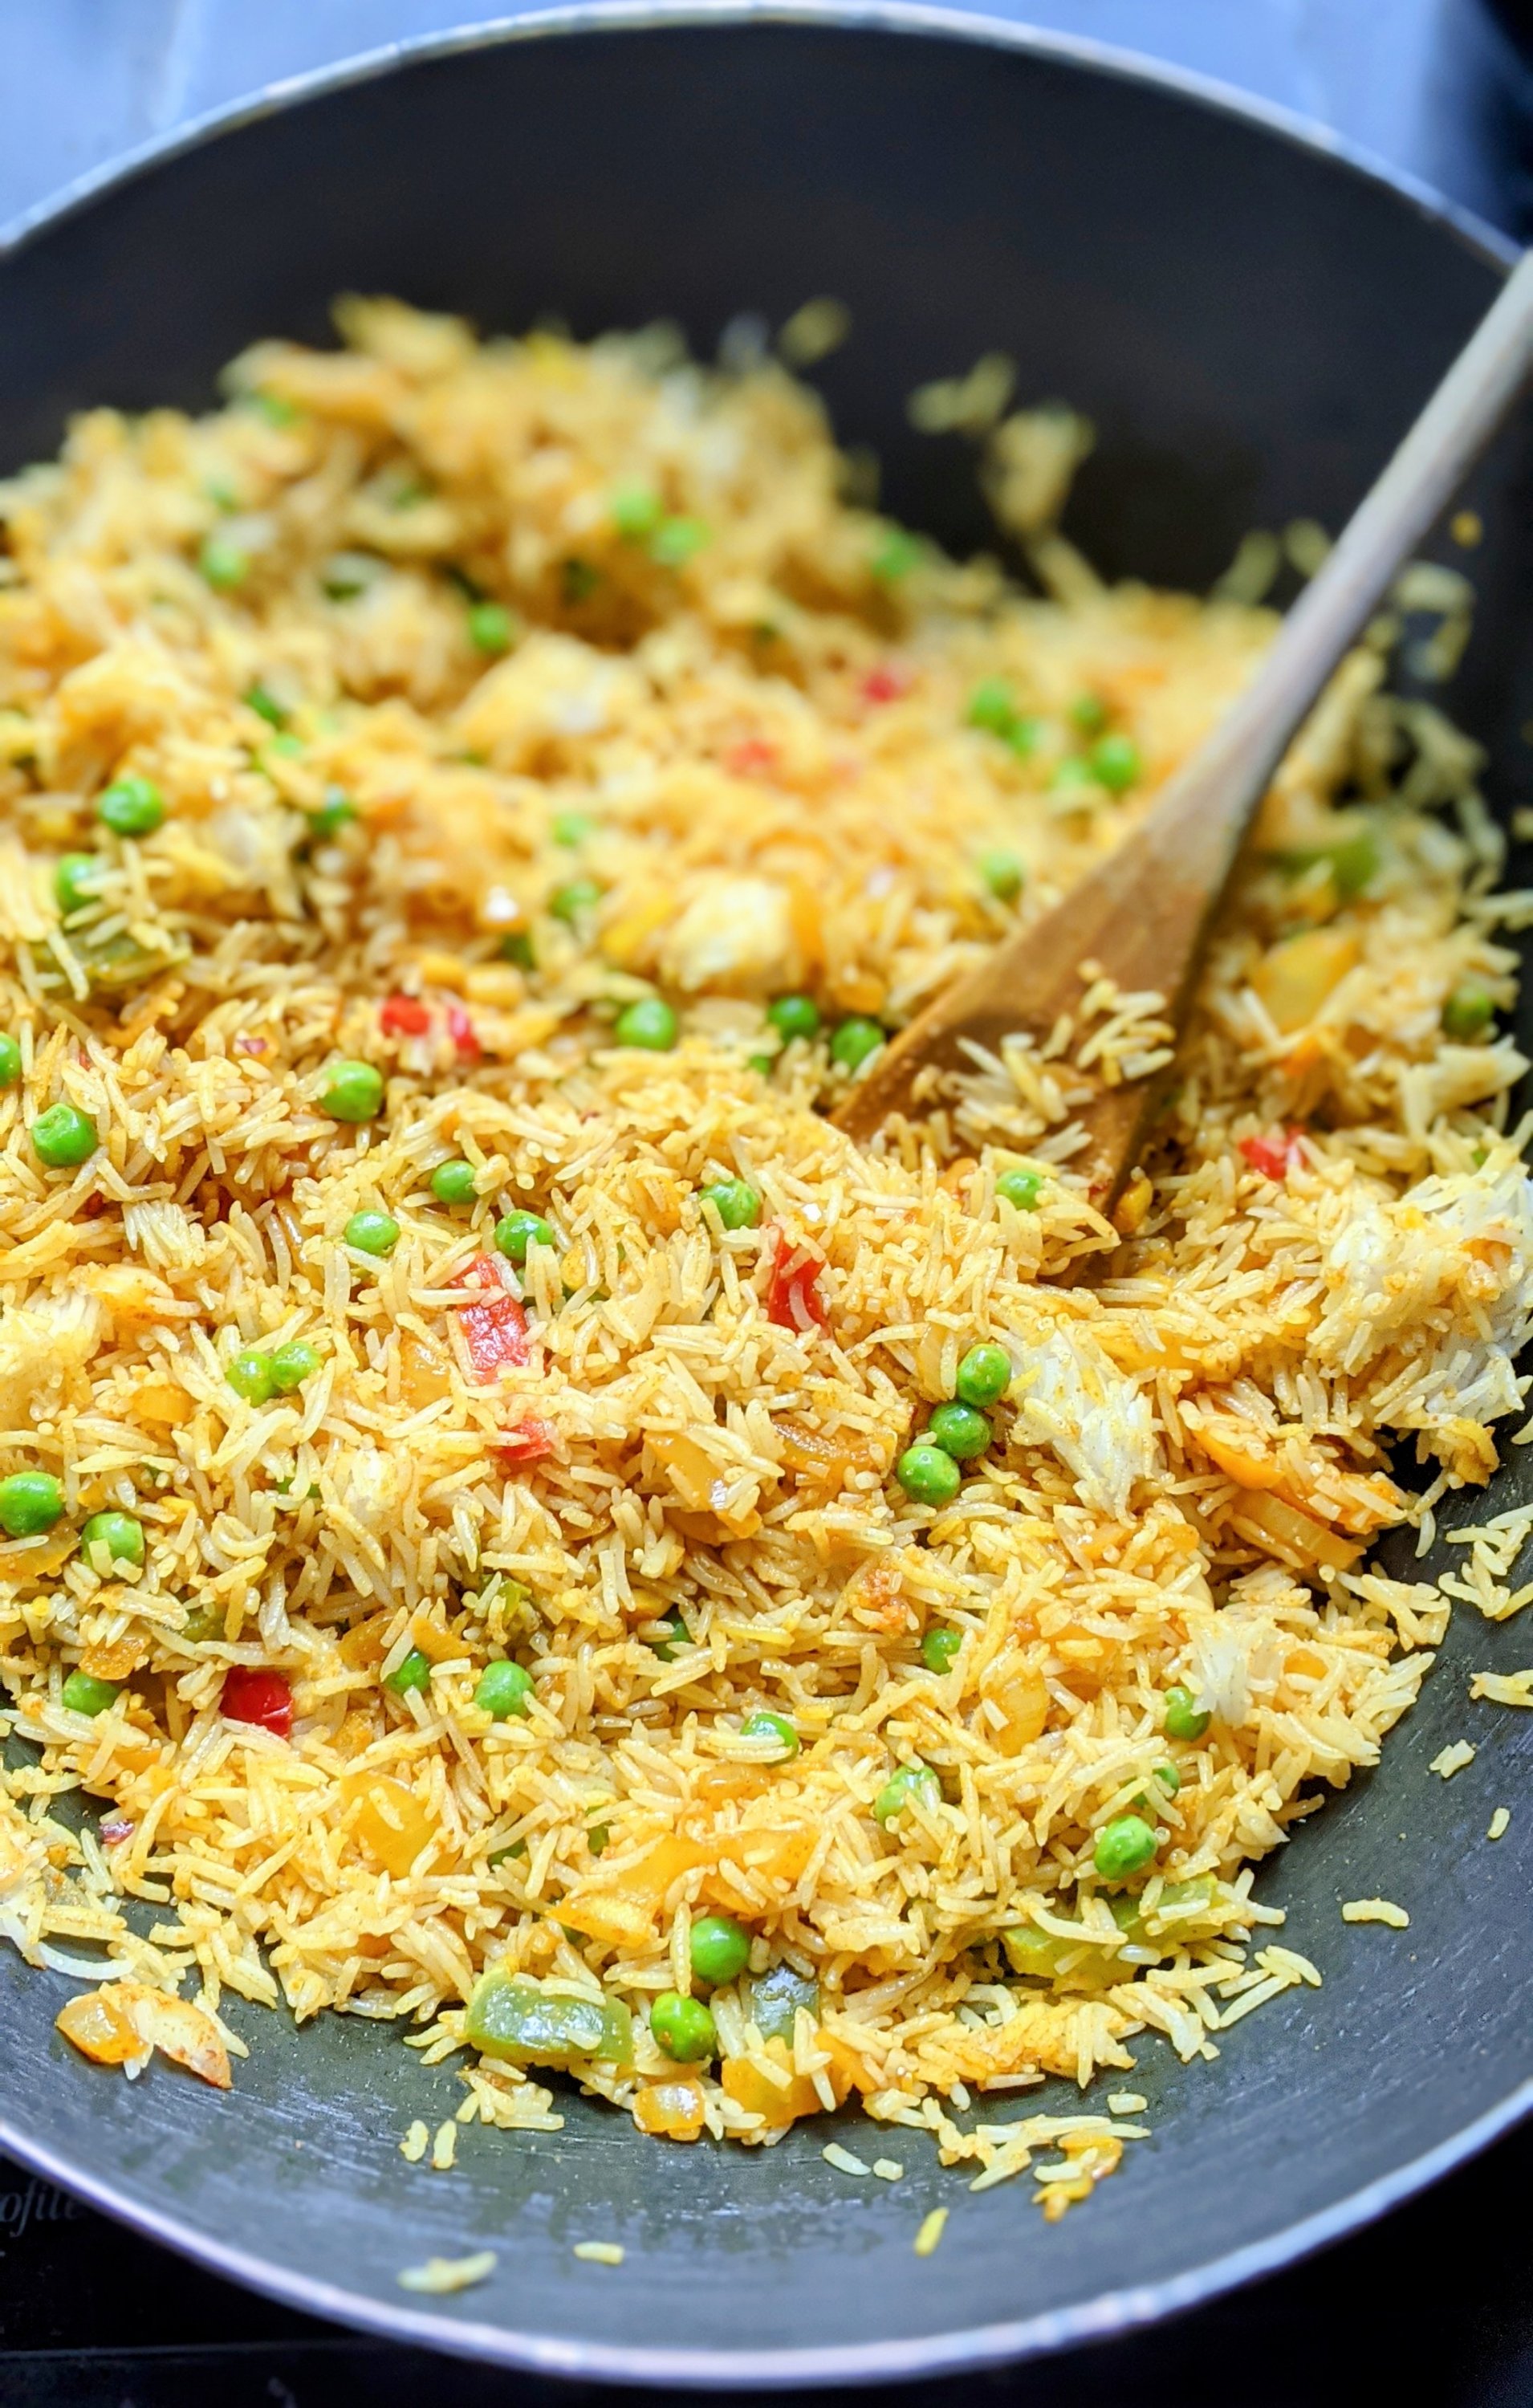 lemon turmeric fried rice recipe with turmeric healthy greek fried rice copycat middle eastern fried rice with turmeric golden fried rice vegan vegetarian and gluten free fried rice recipes